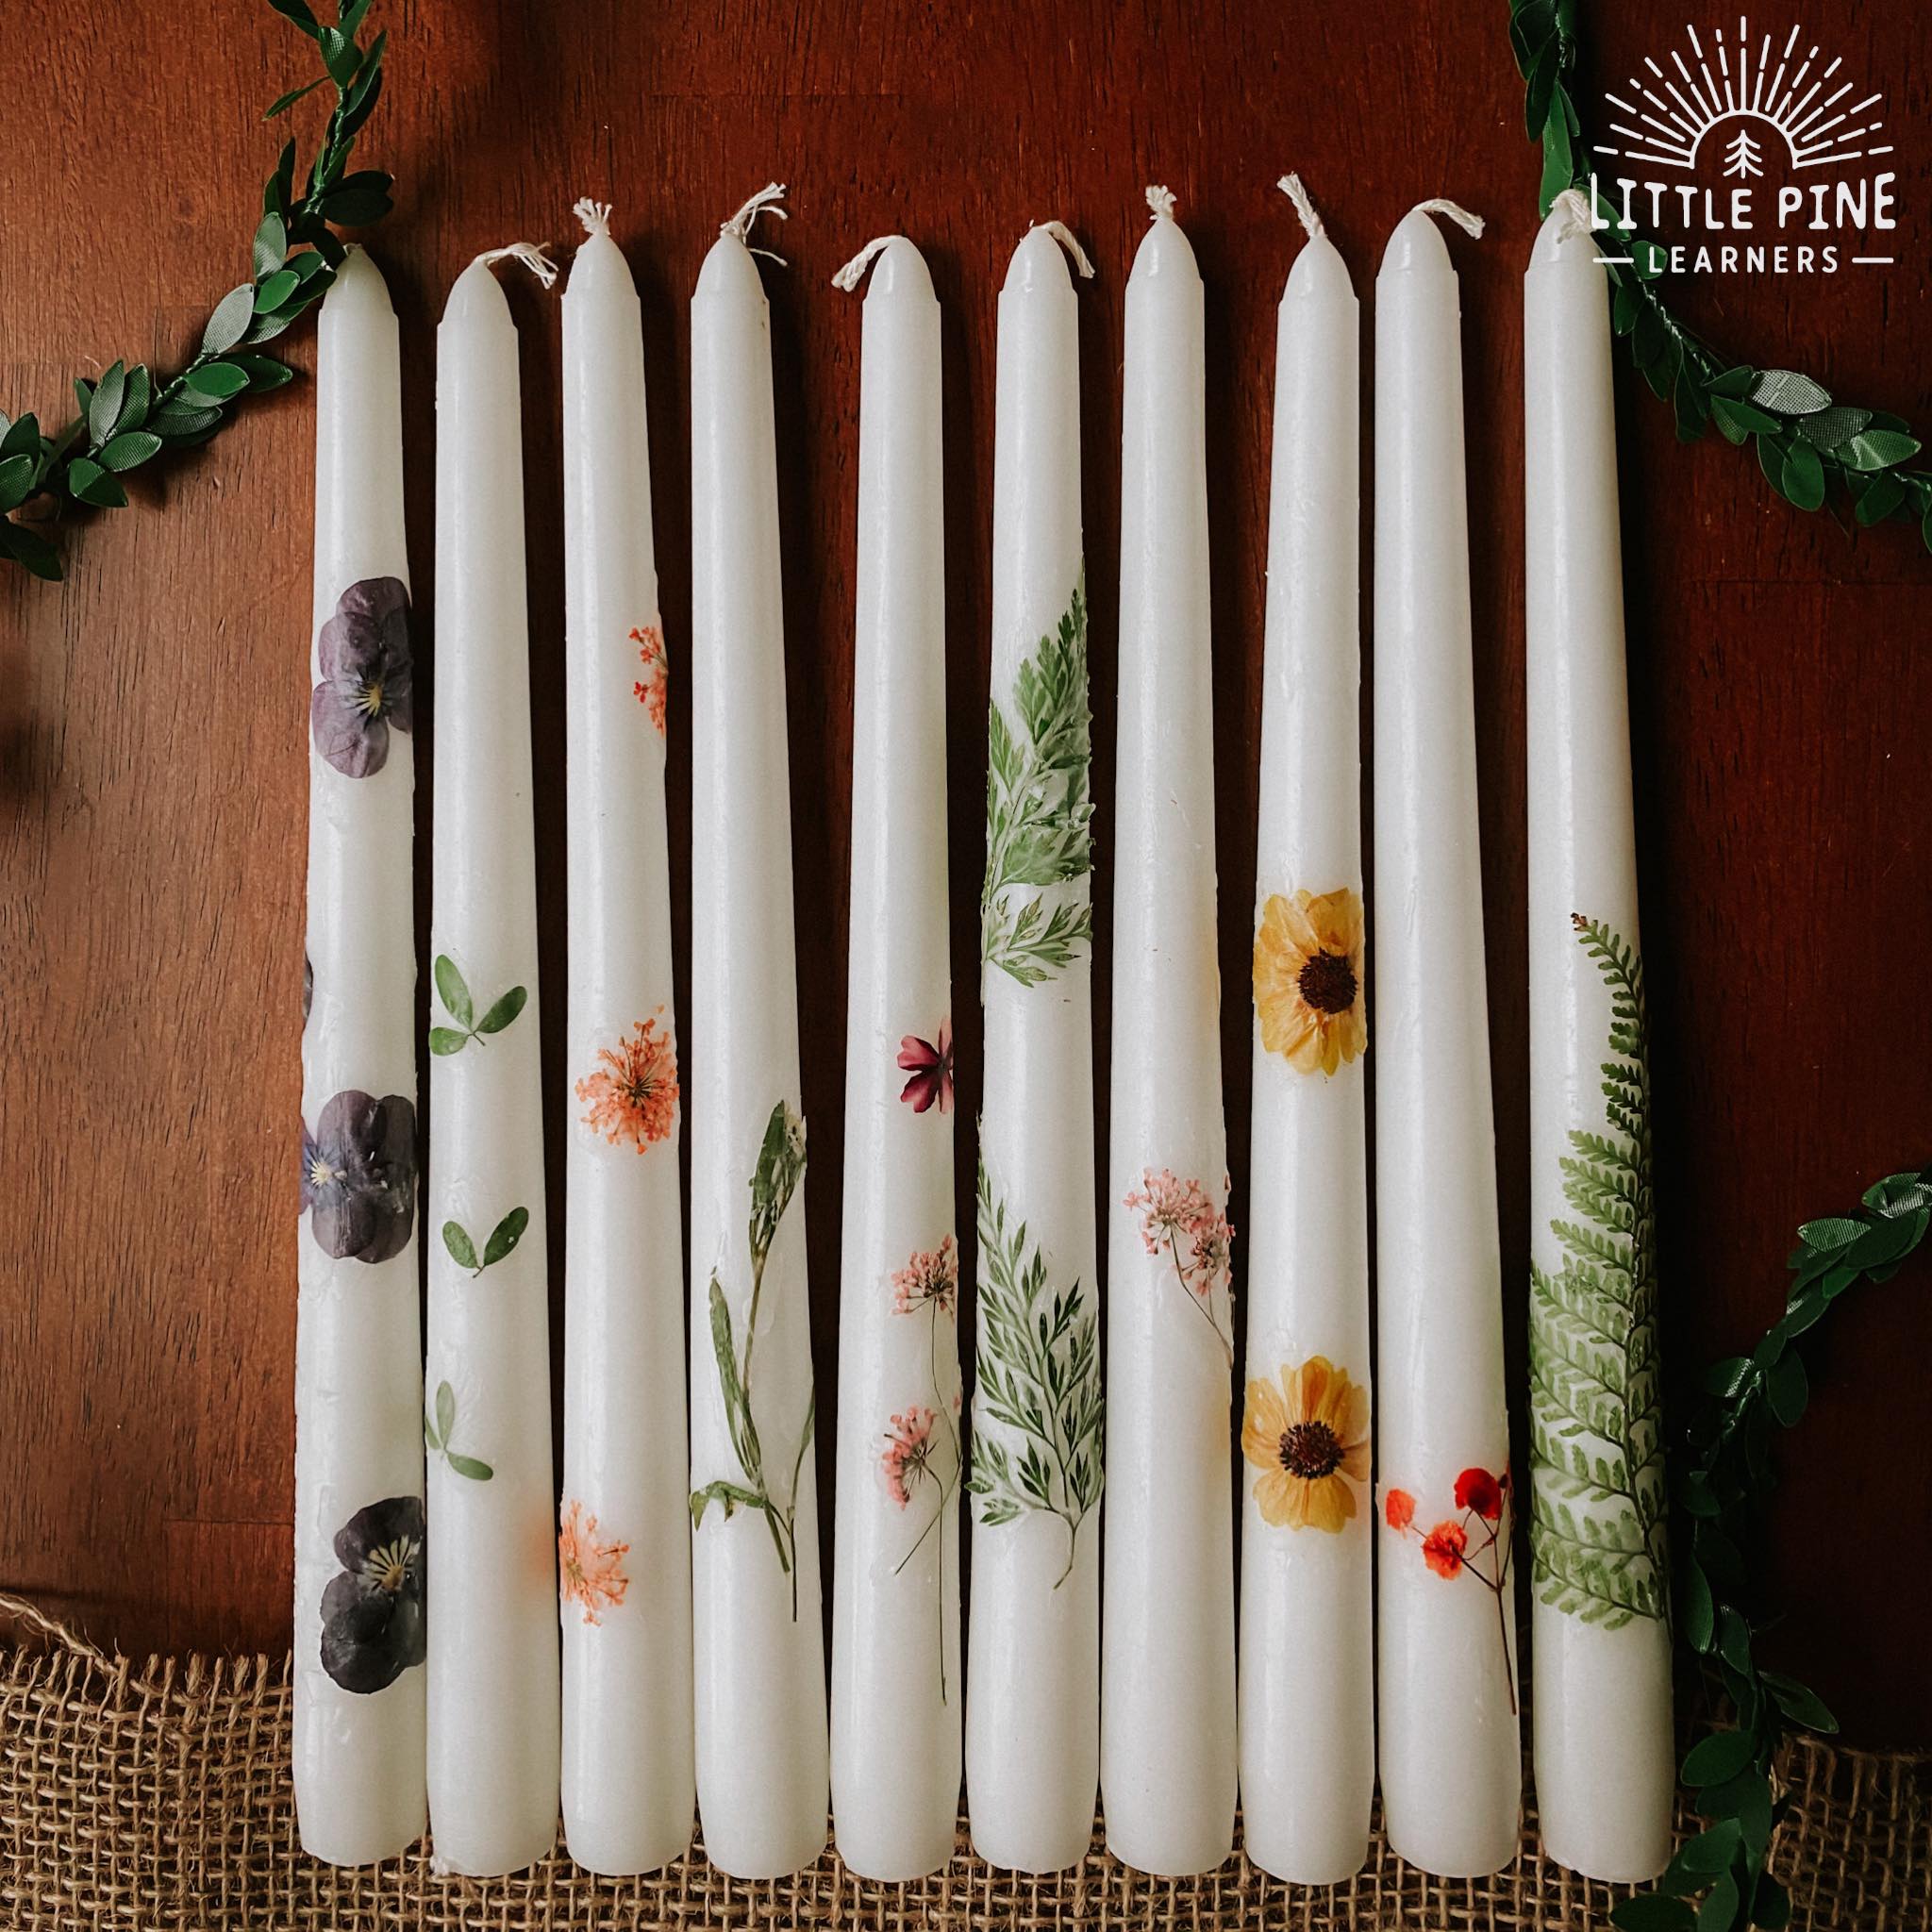 Pressed Flowers on Candles - I Try DIY